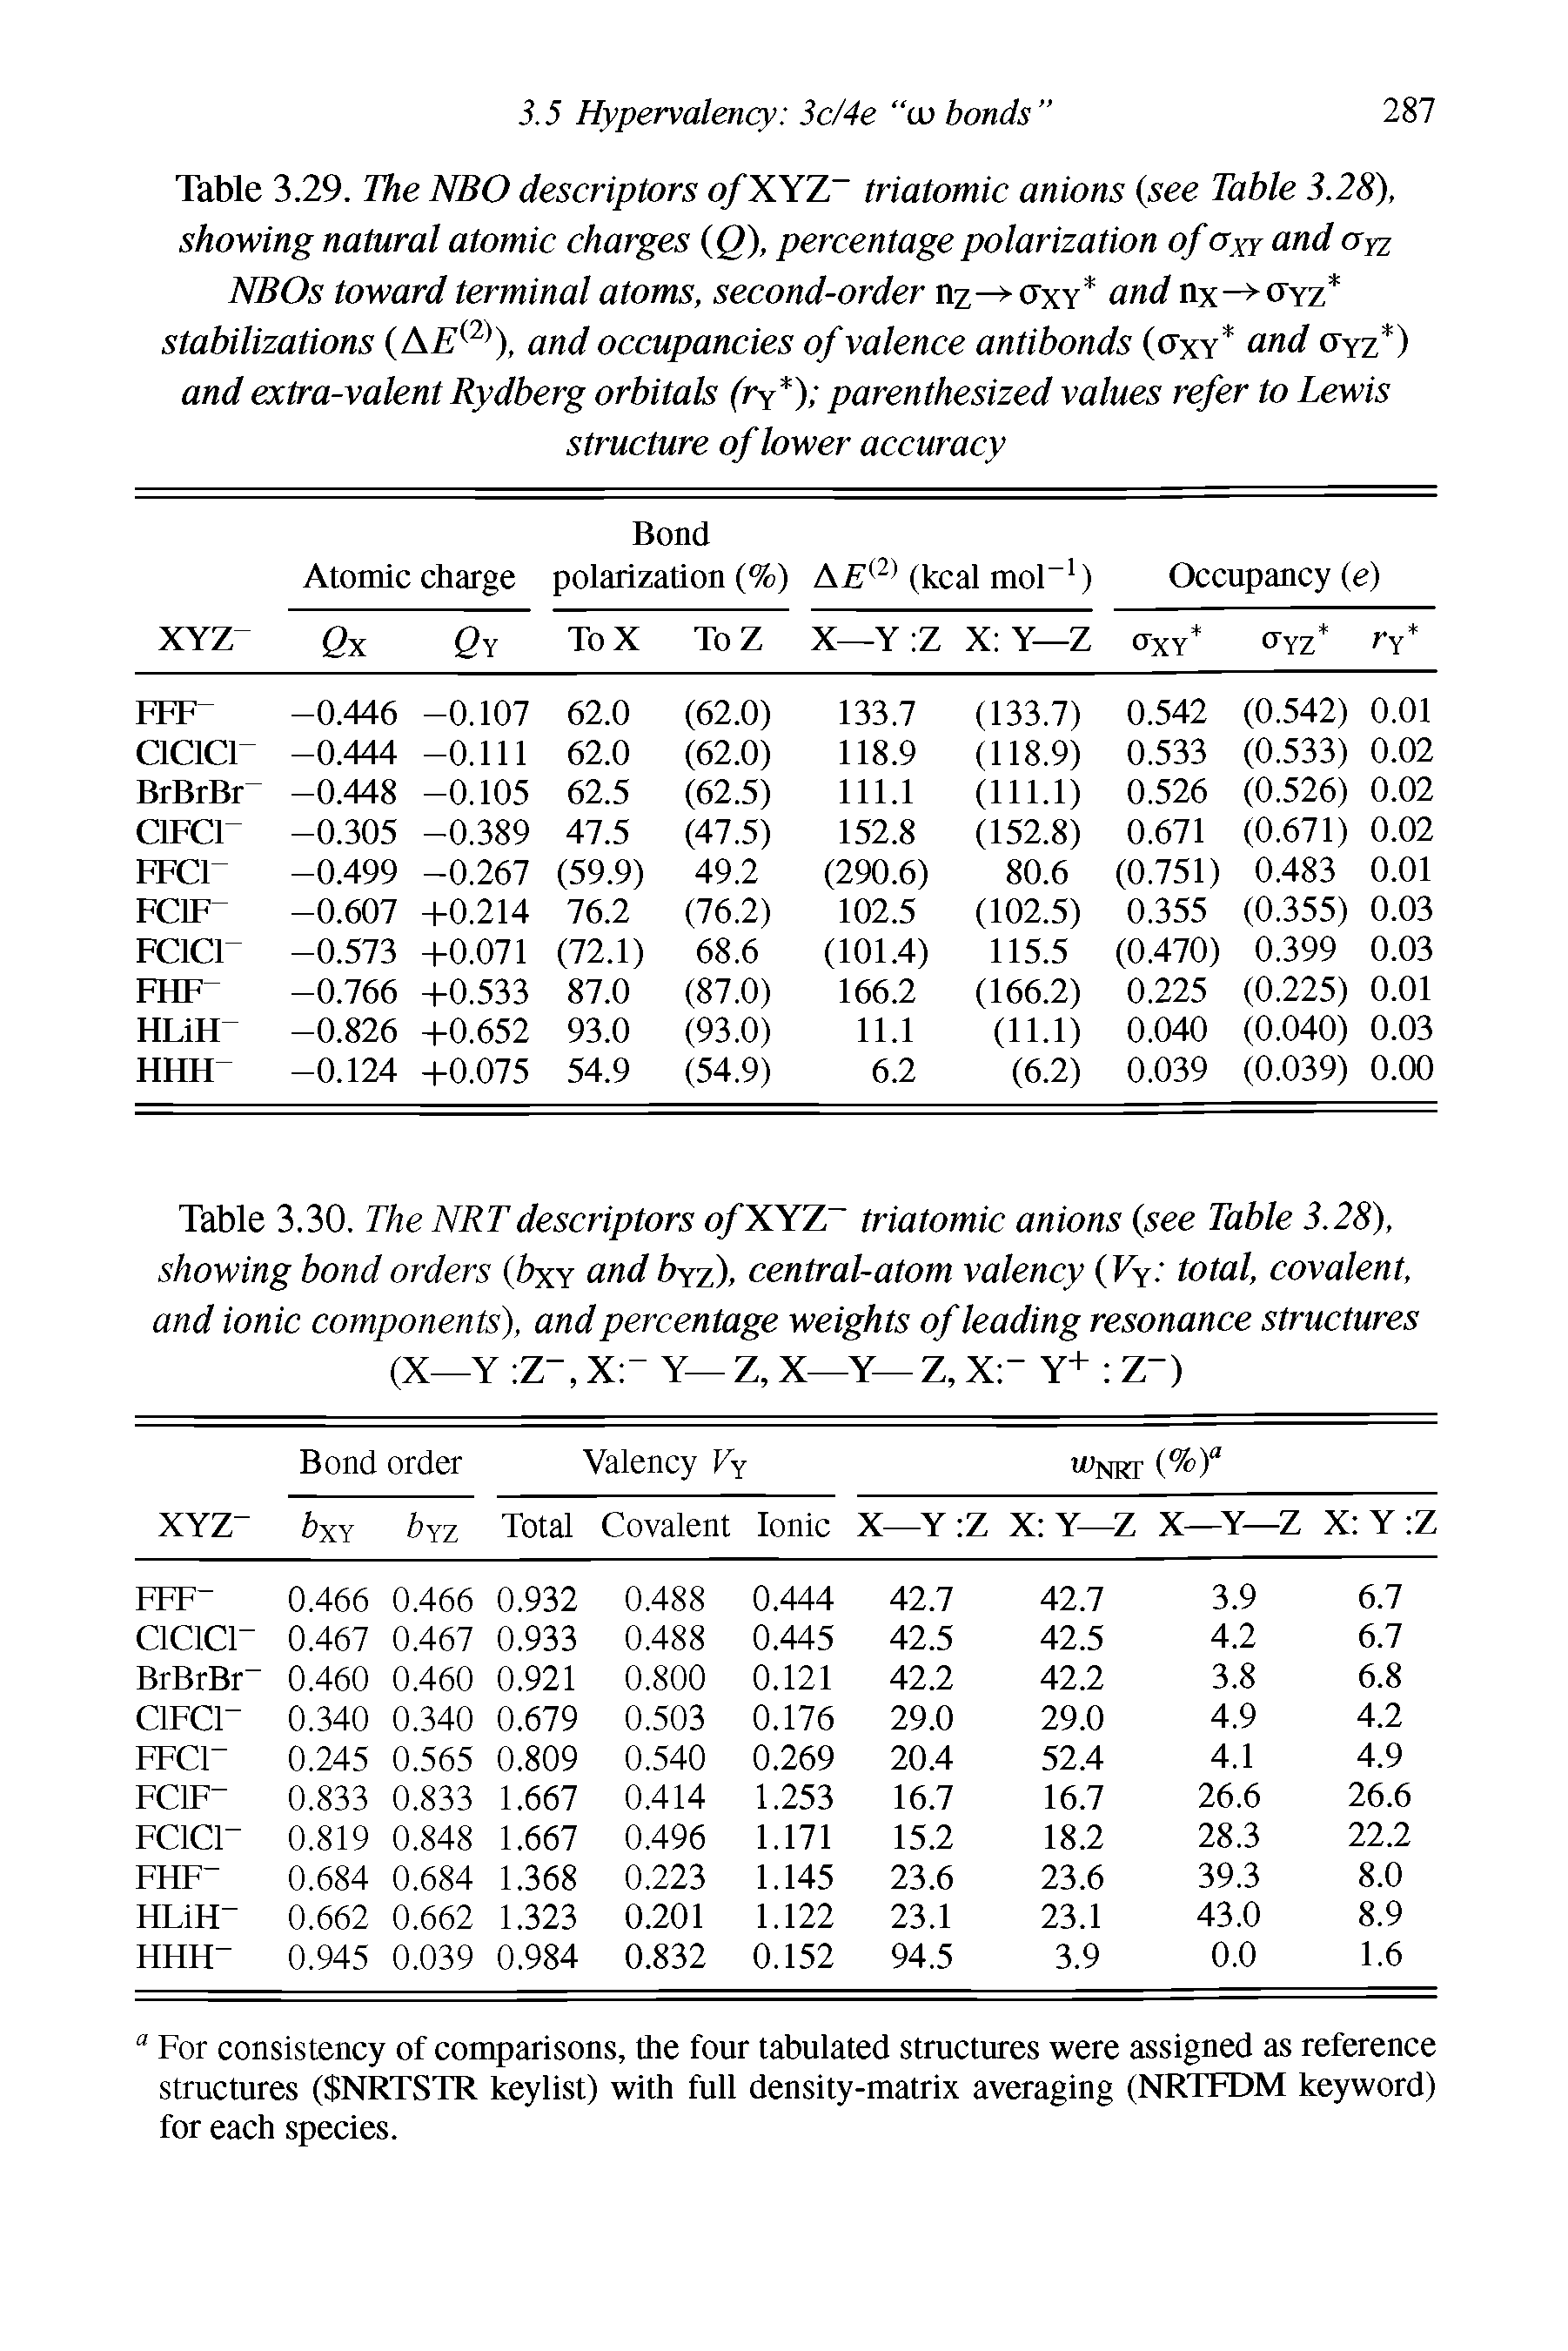 Table 3.30. The NRTdescriptors of XYZ triatomic anions (see Table 3.28), showing bond orders (bxy and by/), central-atom valency (Vy total, covalent, and ionic components), and percentage weights of leading resonance structures (X—Y Z, X. Y— Z, X—Y— Z, X. Y+ Z )...